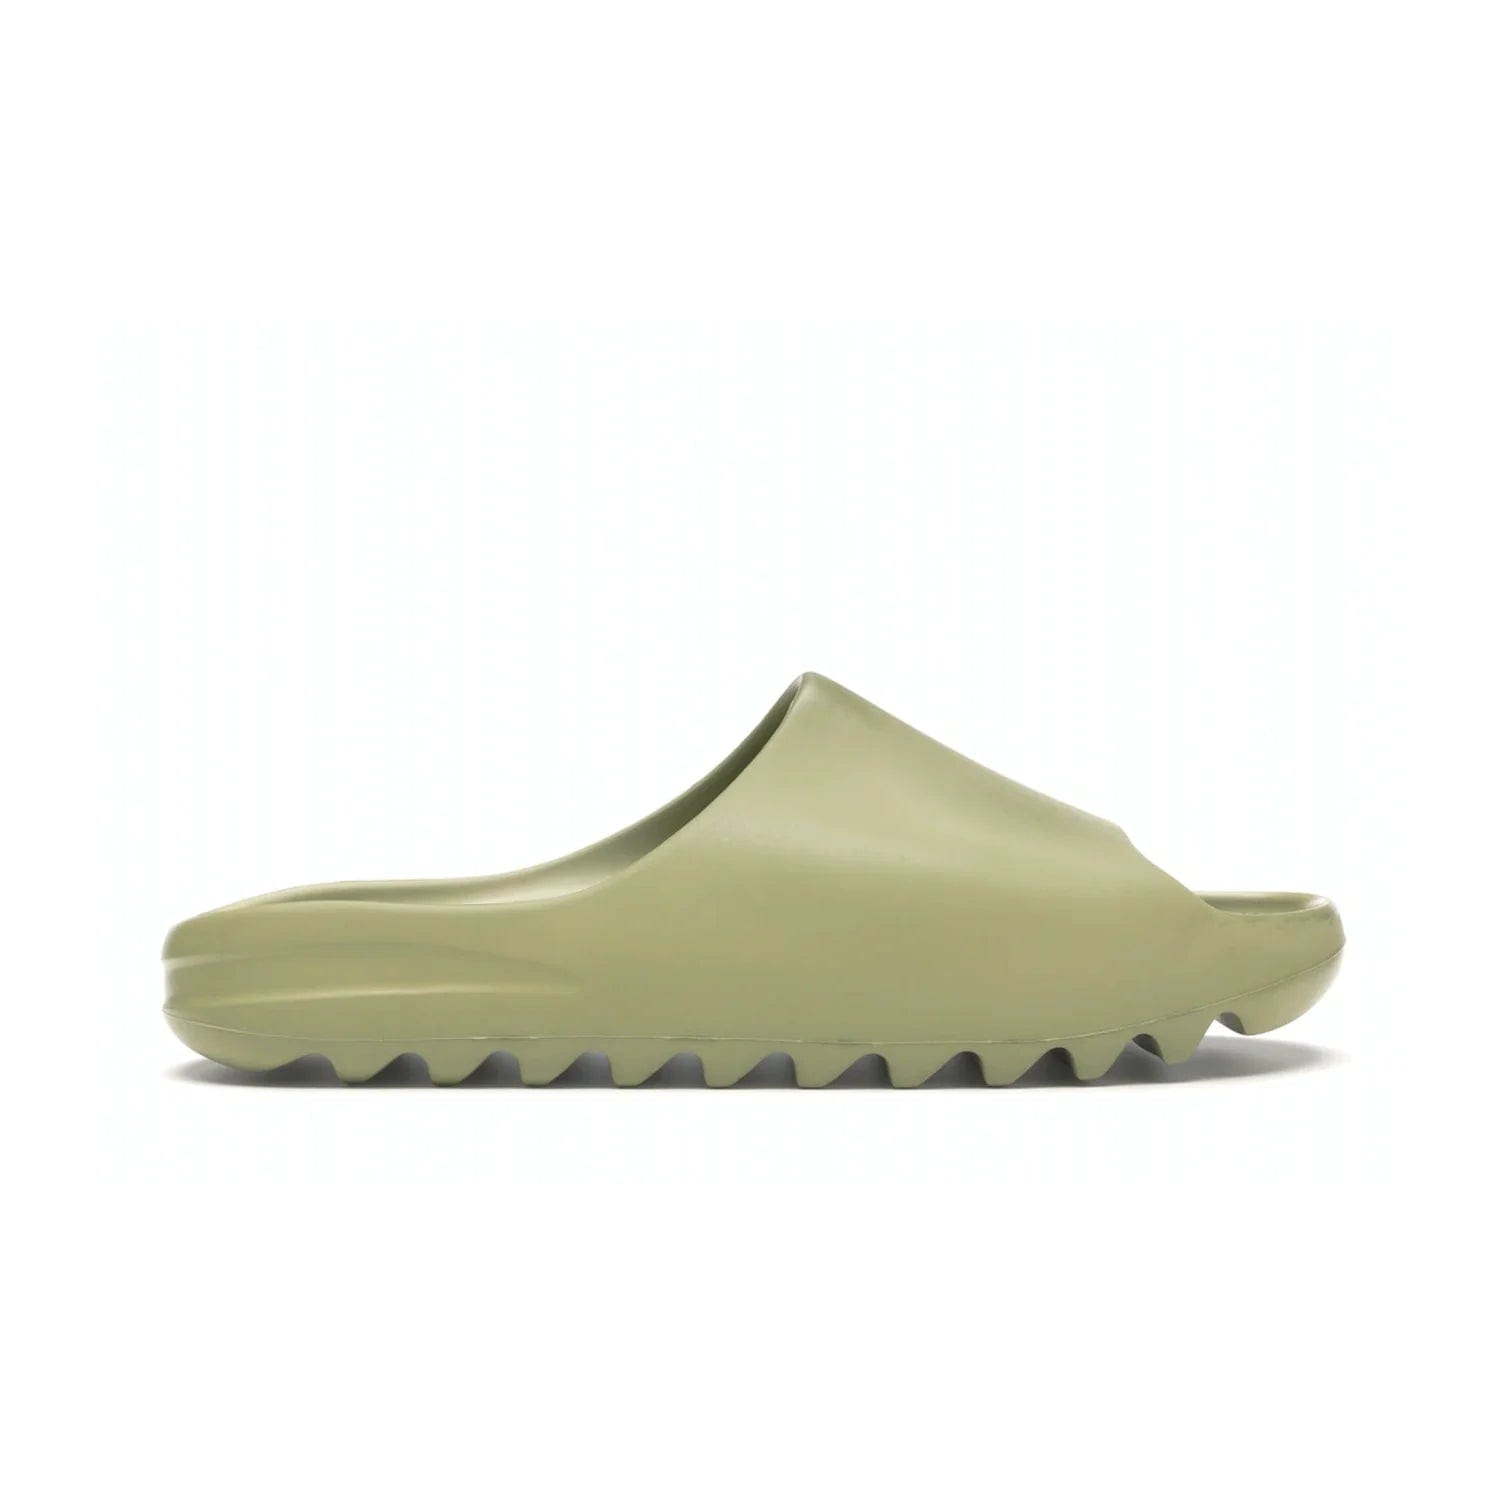 adidas Yeezy Slide Resin (2019/2021) - Image 1 - Only at www.BallersClubKickz.com - Step into fashion and function with the adidas Yeezy Slide Resin. Featuring a lightweight Resin EVA foam construction and an outsole with accentuated grooves for traction and support. The latest release is available in a Resin/Resin/Resin colorway, combining modern aesthetics and classic style. Step into style with the adidas Yeezy Slide Resin and be the trend-setter this season.